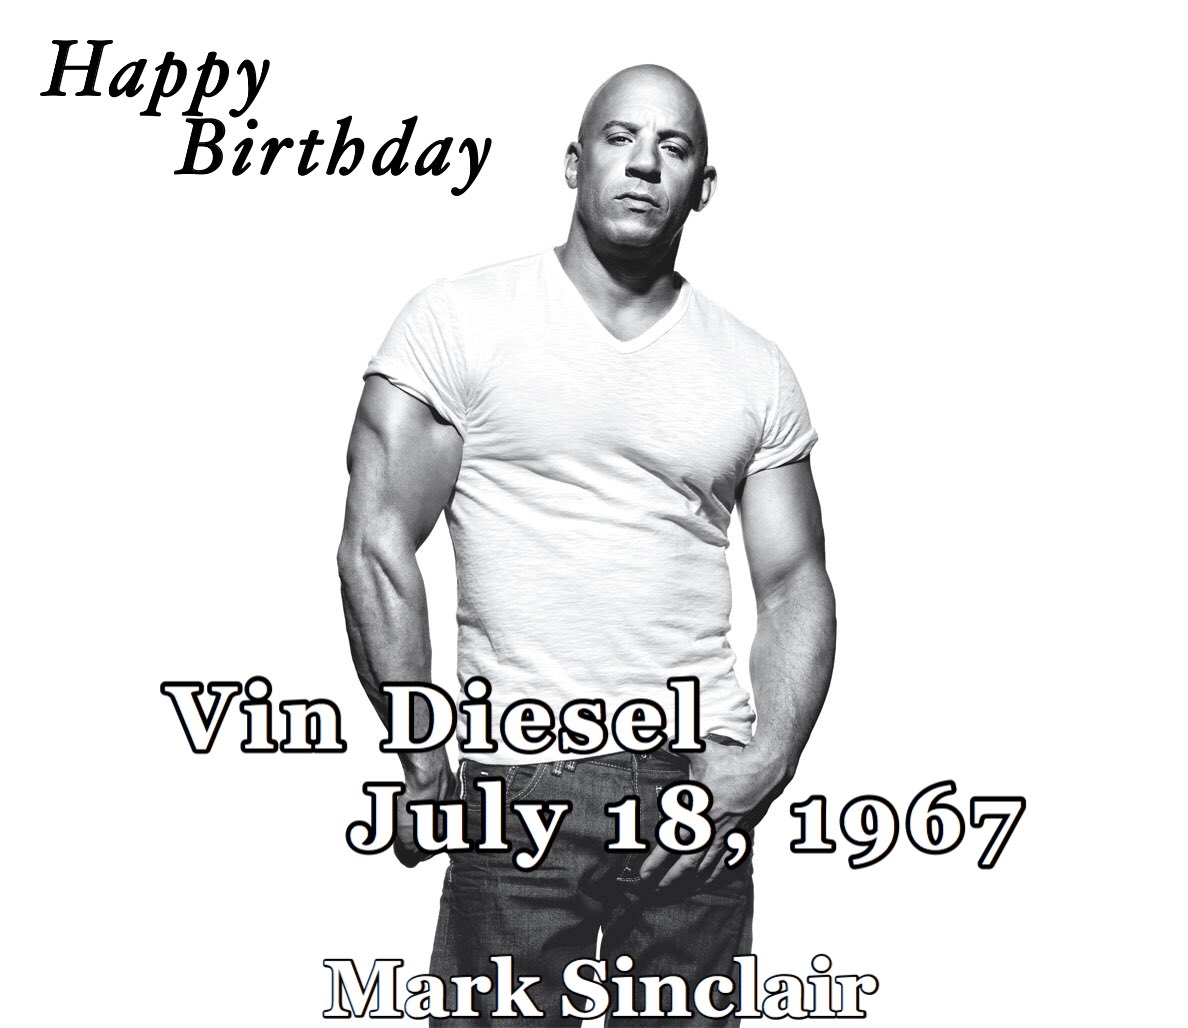 Happy Birthday Vin Diesel, is an American actor, producer, director and screenwriter. 